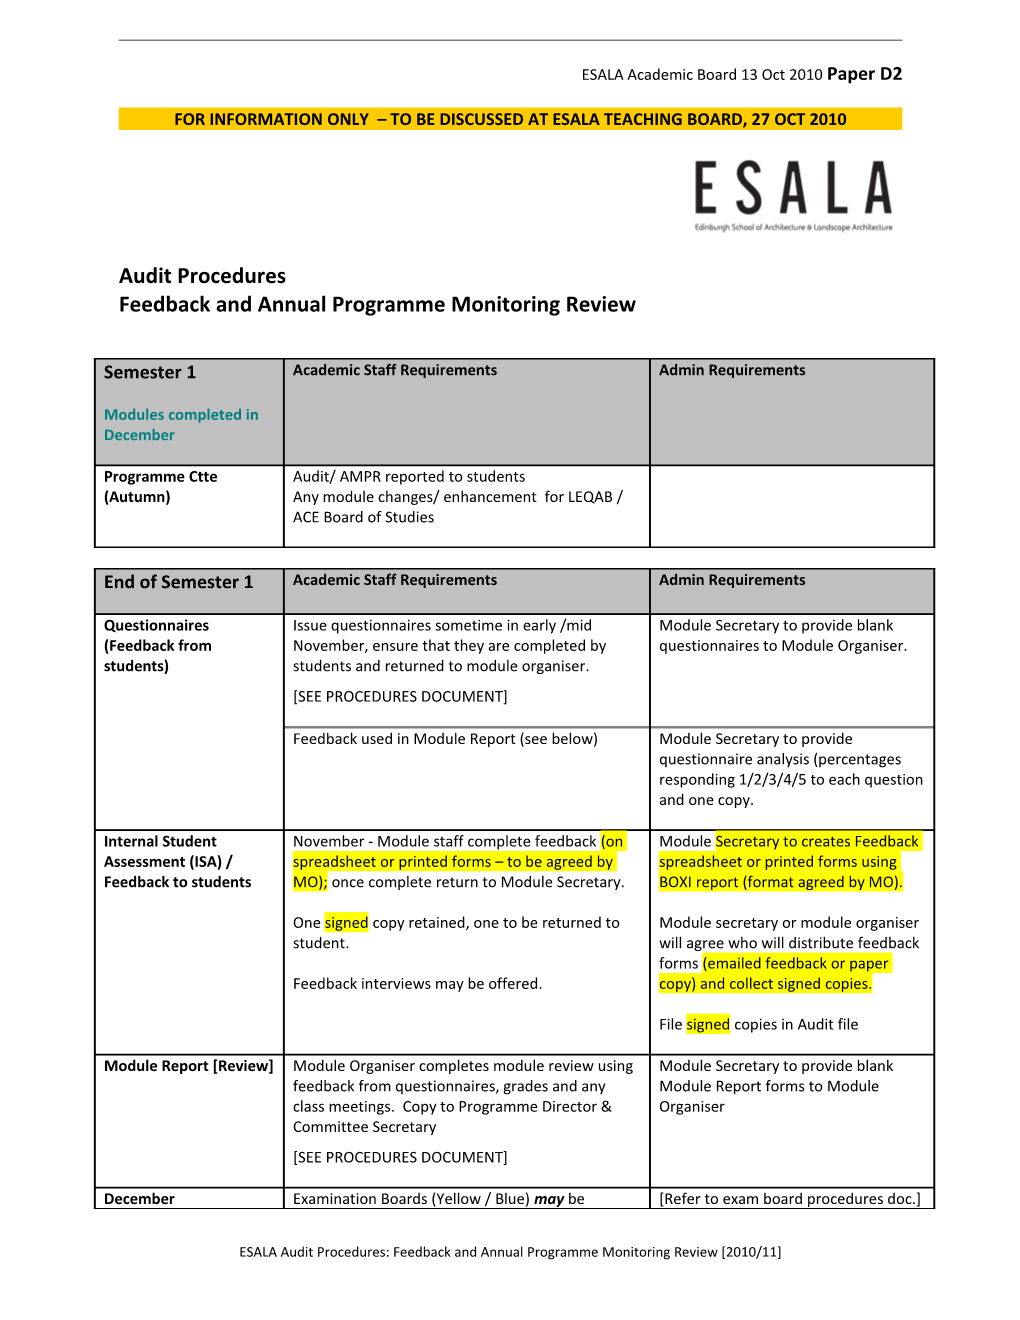 For Information Only to Be Discussed at Esala Teaching Board, 27 Oct 2010